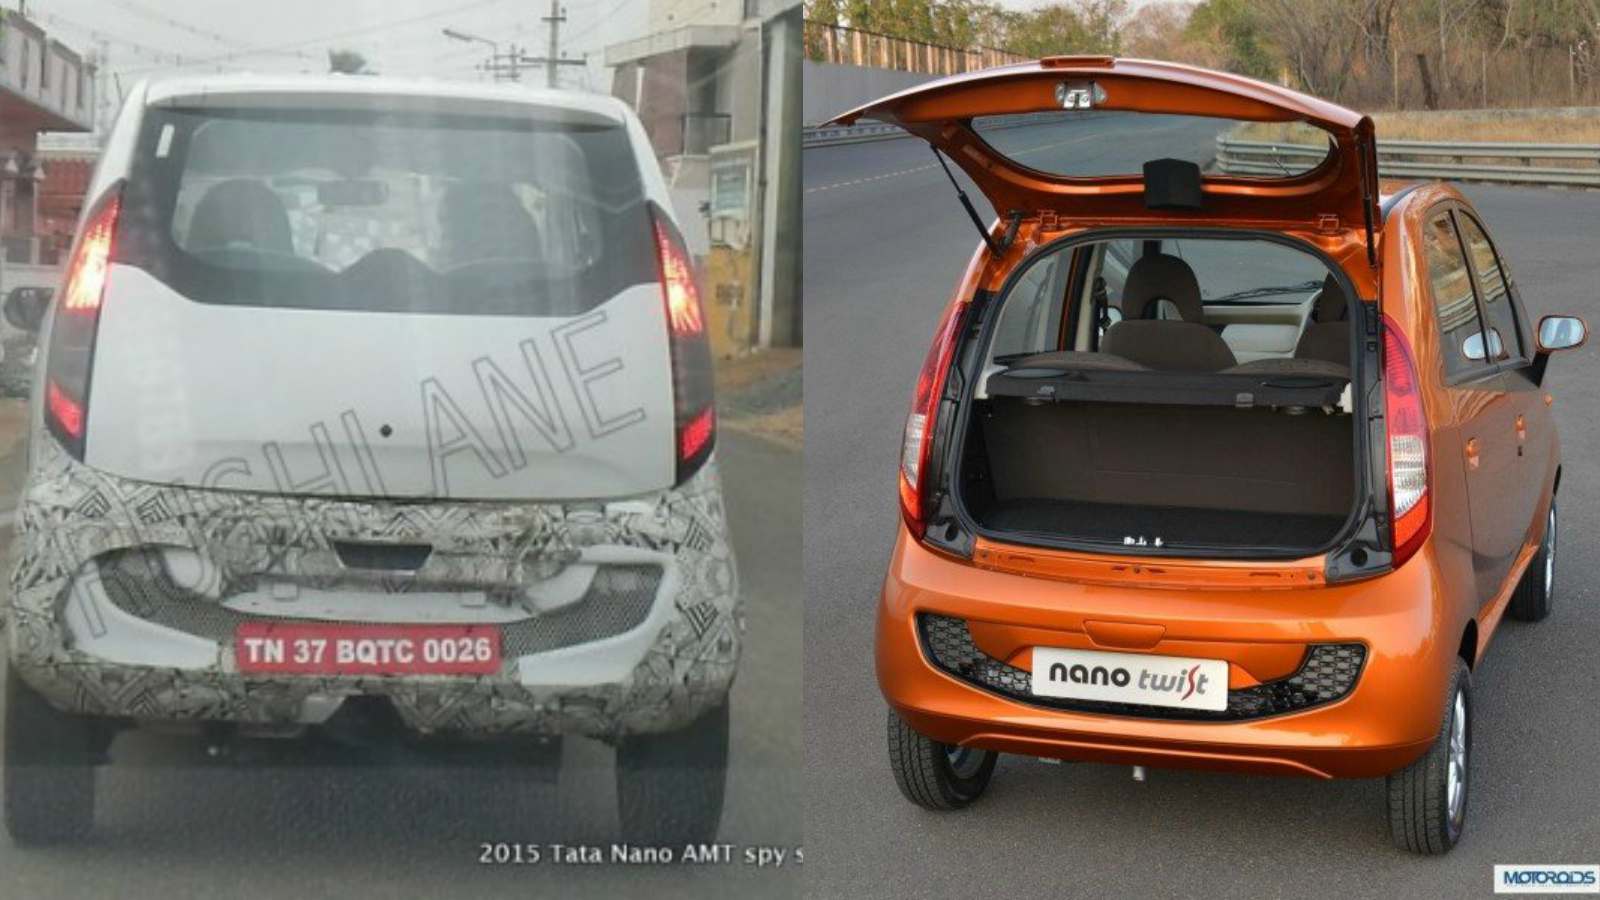 https://www.motoroids.com/wp-content/uploads/2014/06/Tata-Nano-Twist-Active-With-an-Openable-Boot.jpg